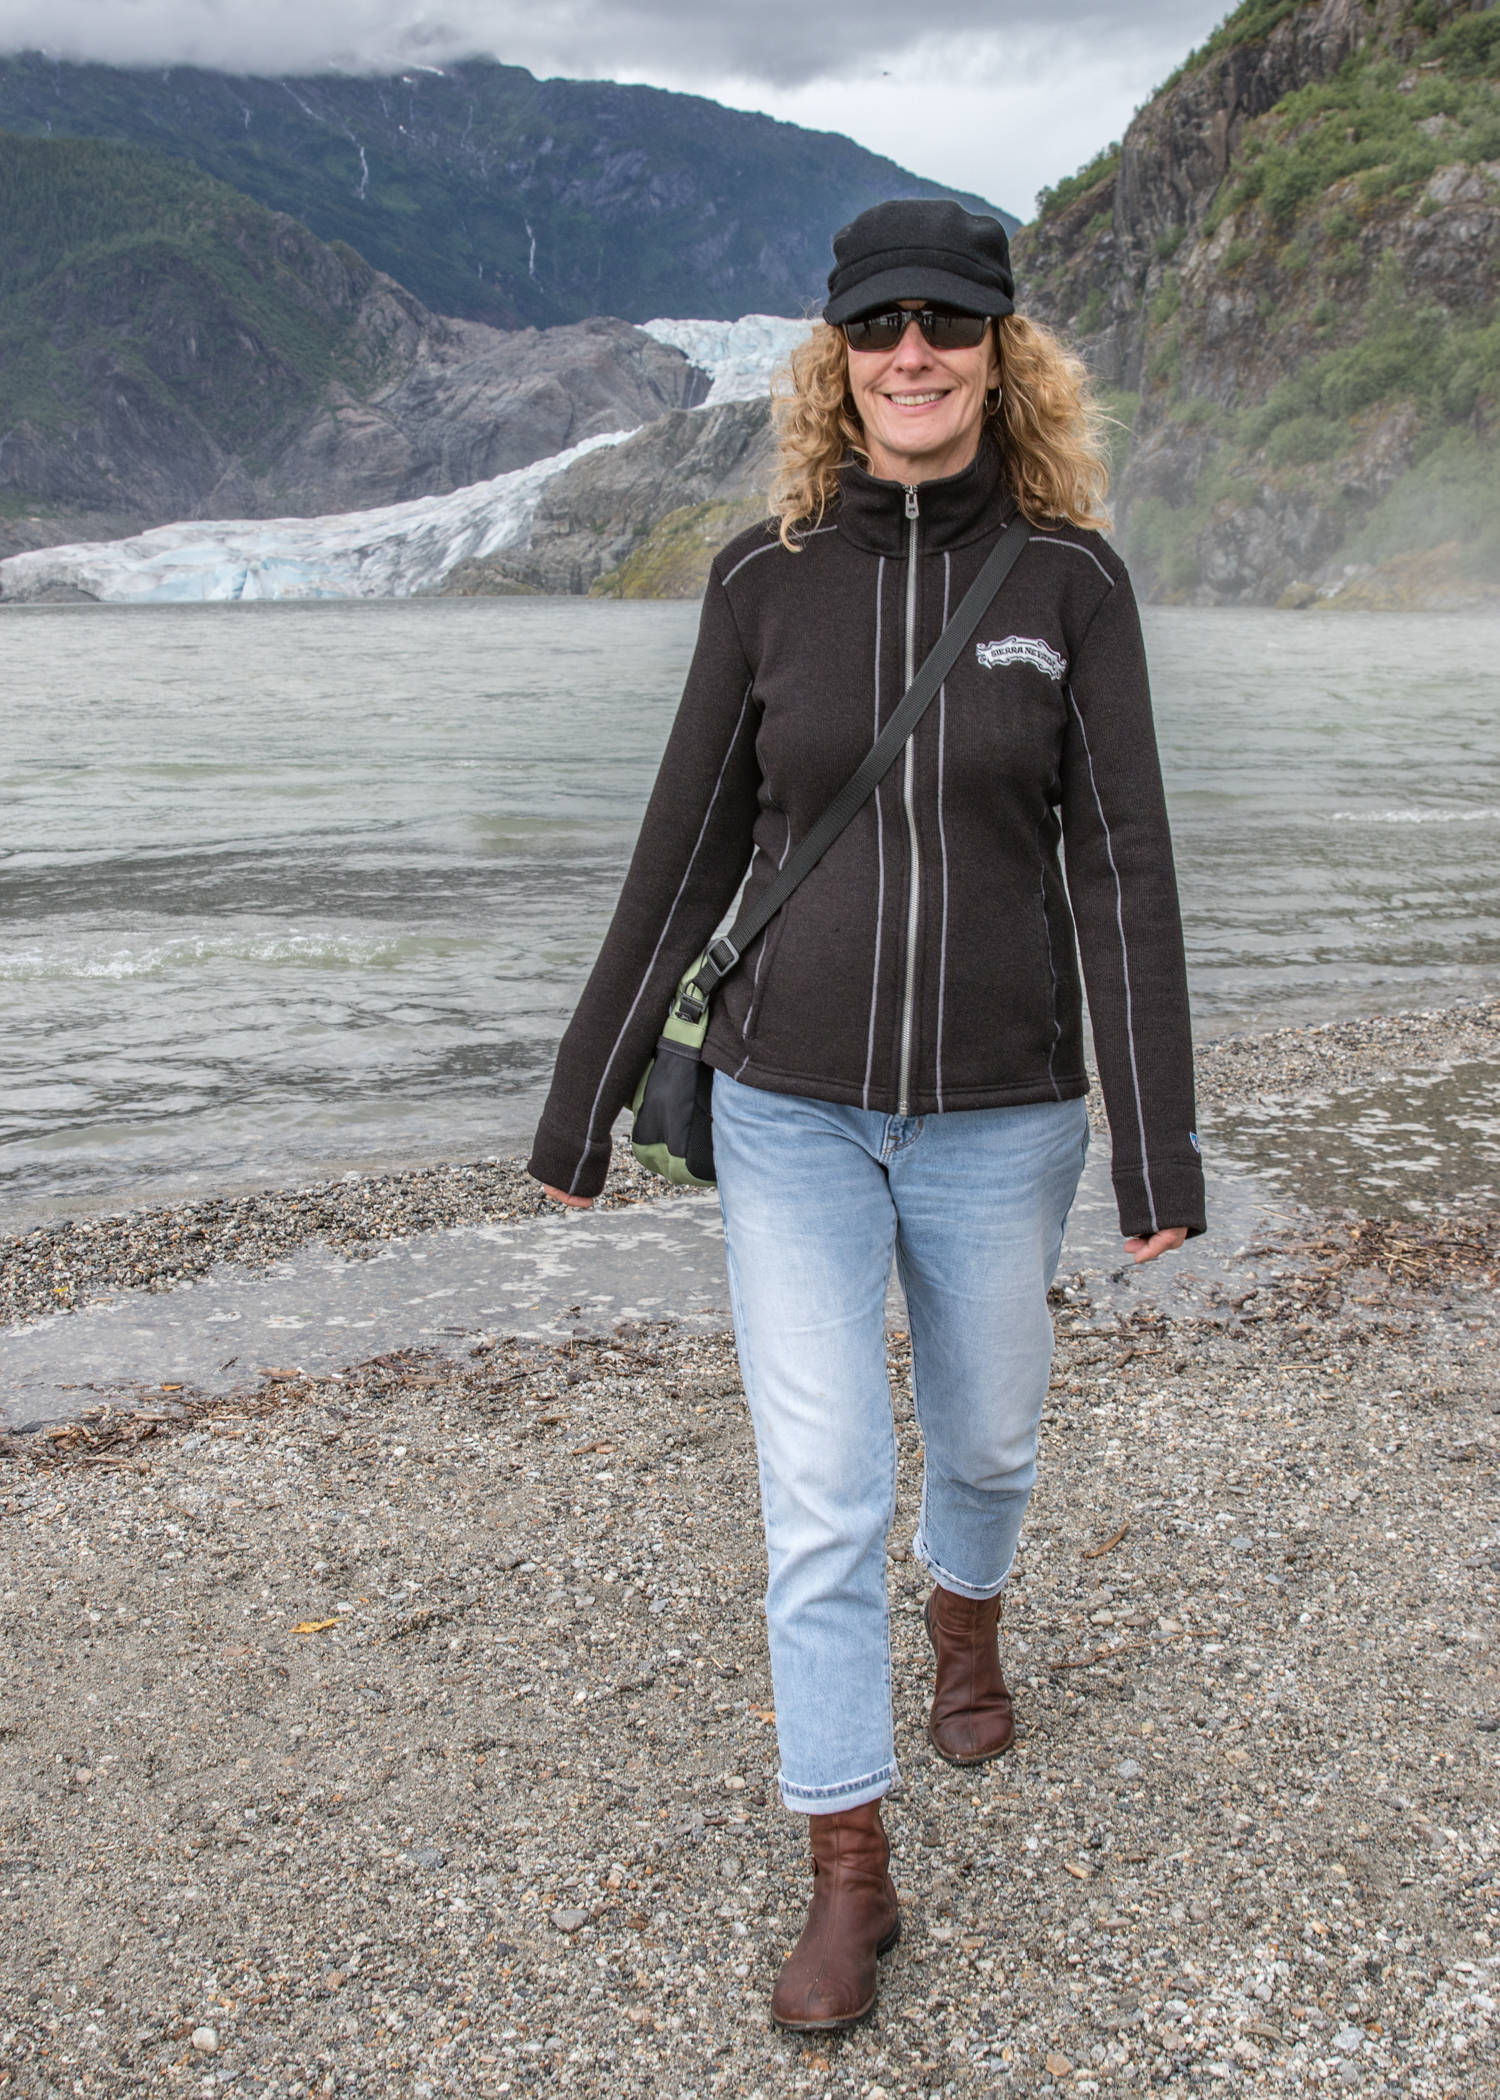 Oct. 7, 2018: On this cool day by the glacier, Veronica Sullivan from Chico, California, stayed warm in style. She pairs a wool zip-up jacket from Kuhl and cuff-rolled Gap jeans with brown leather boots from Merrell. Her black wool busker cap, Chico sling purse and Rayban sunglasses complete her practical but trendy look.